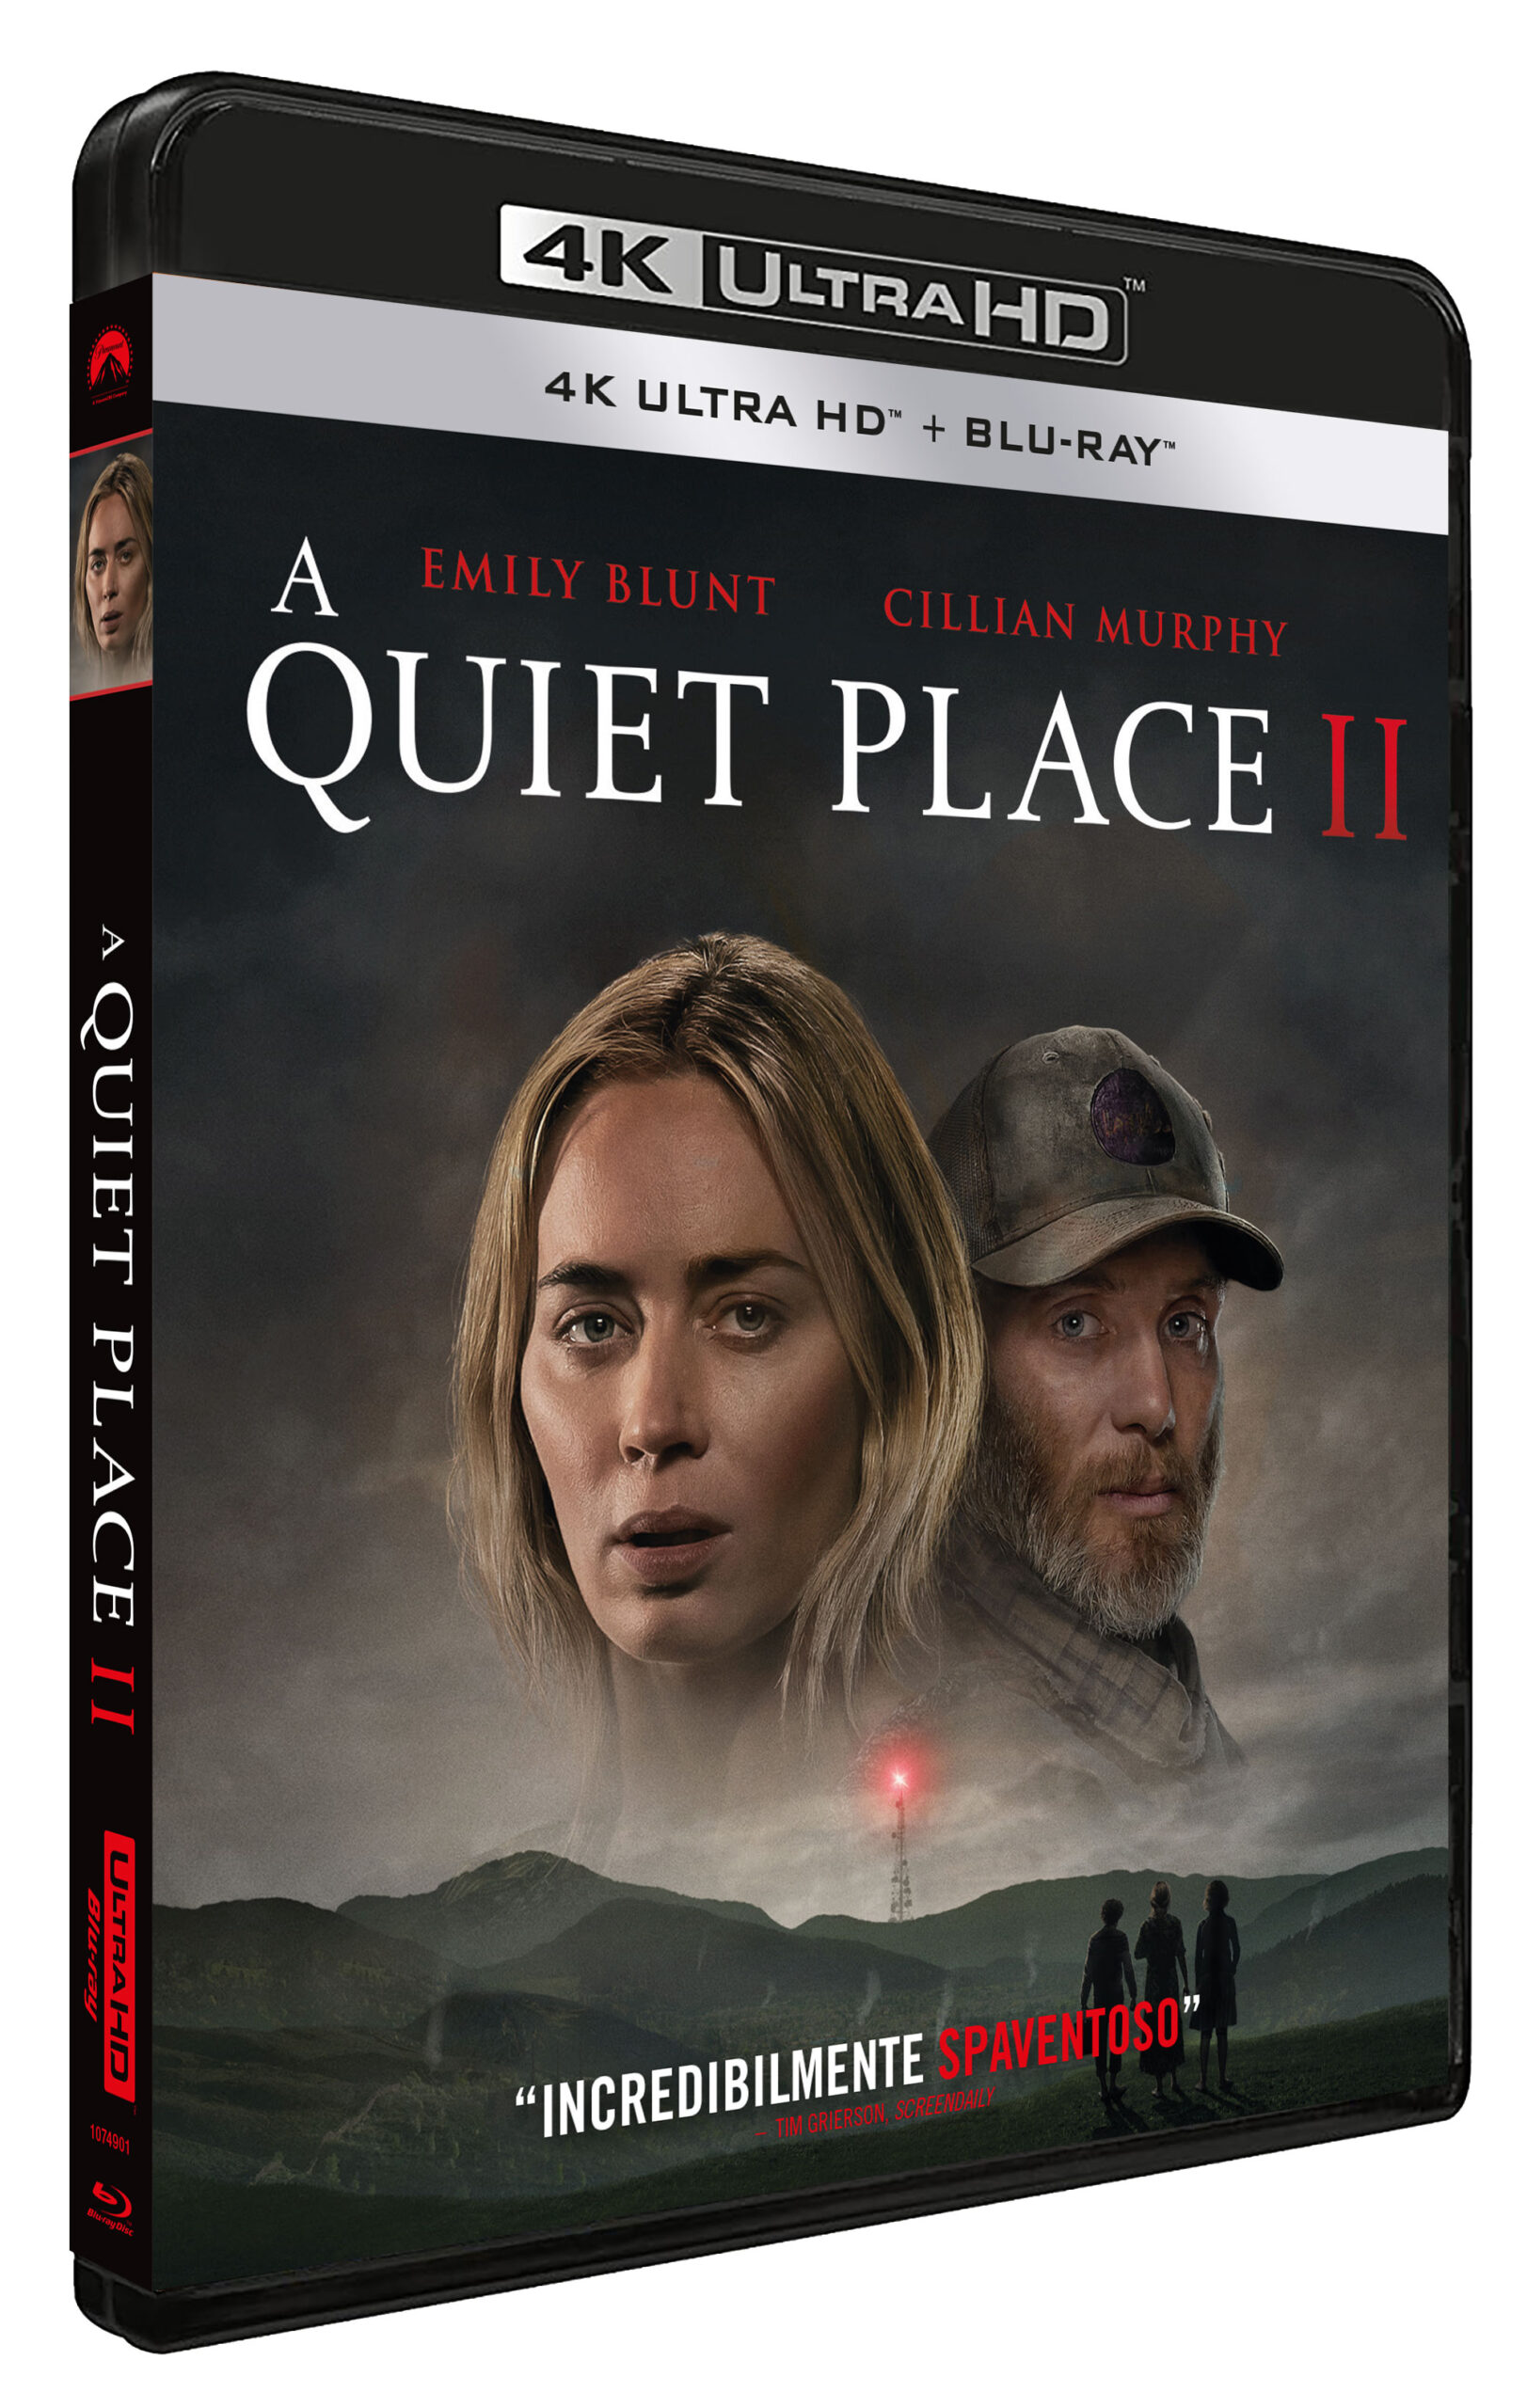 A Quiet Place 2 in 4K UHD + Blu-ray